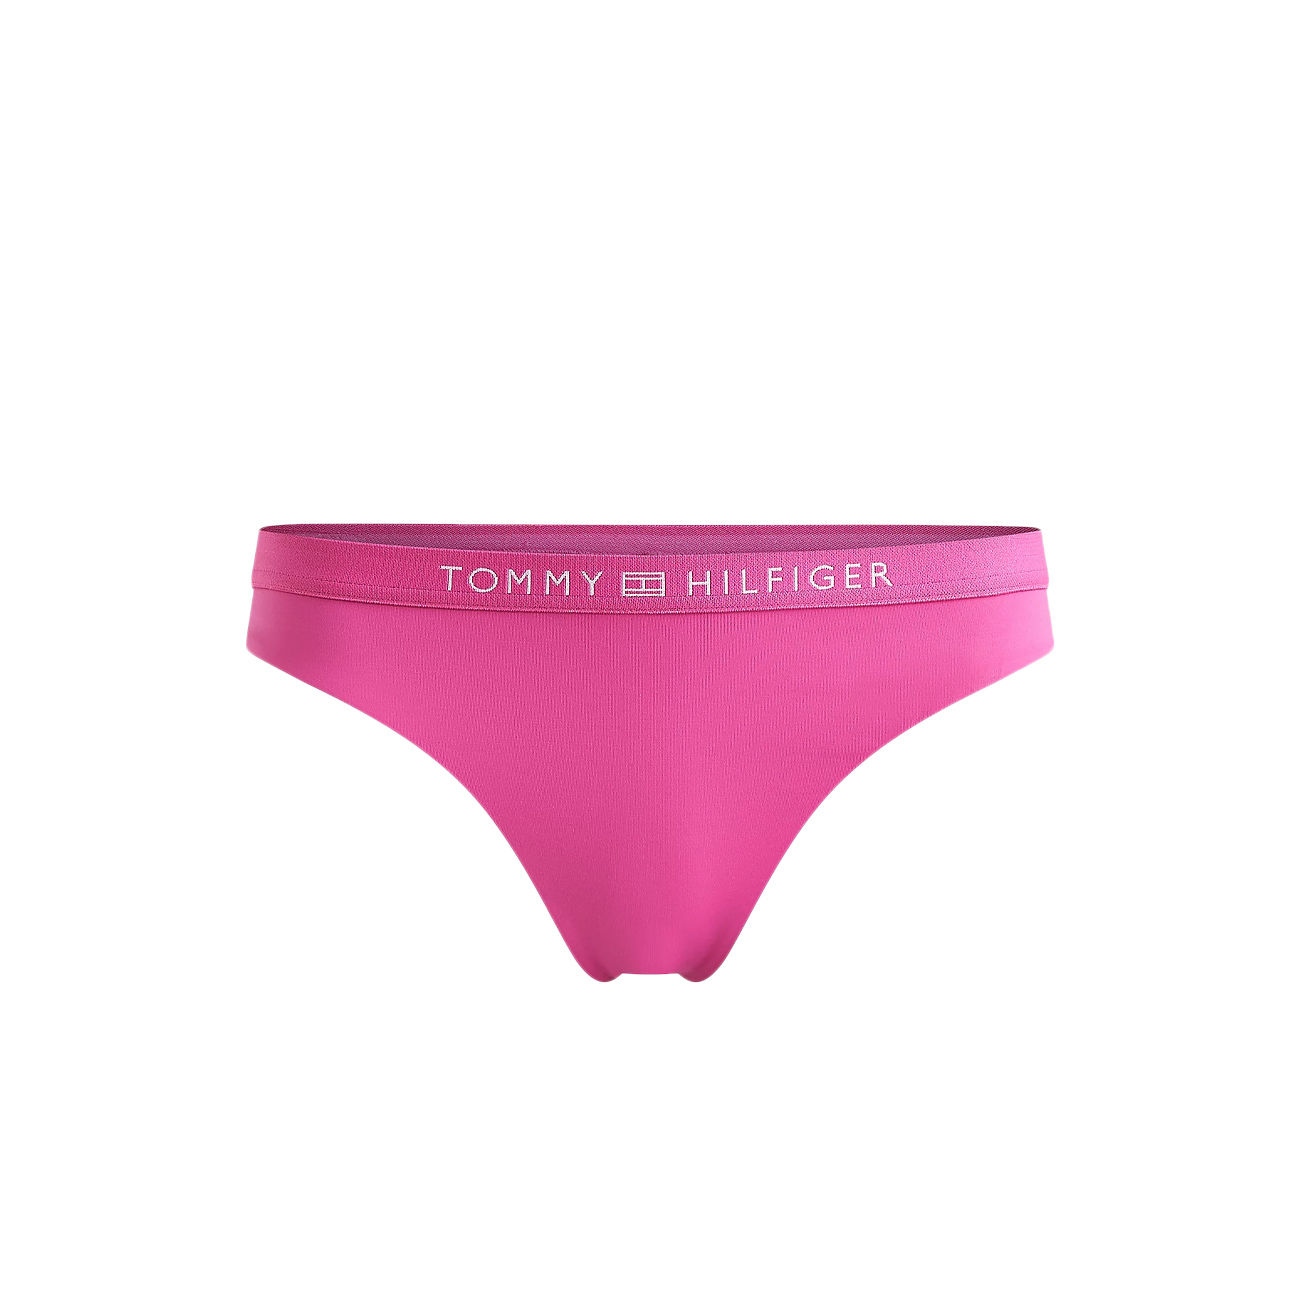 Tommy Hilfiger Nylon Thong/String Panties for Women for sale